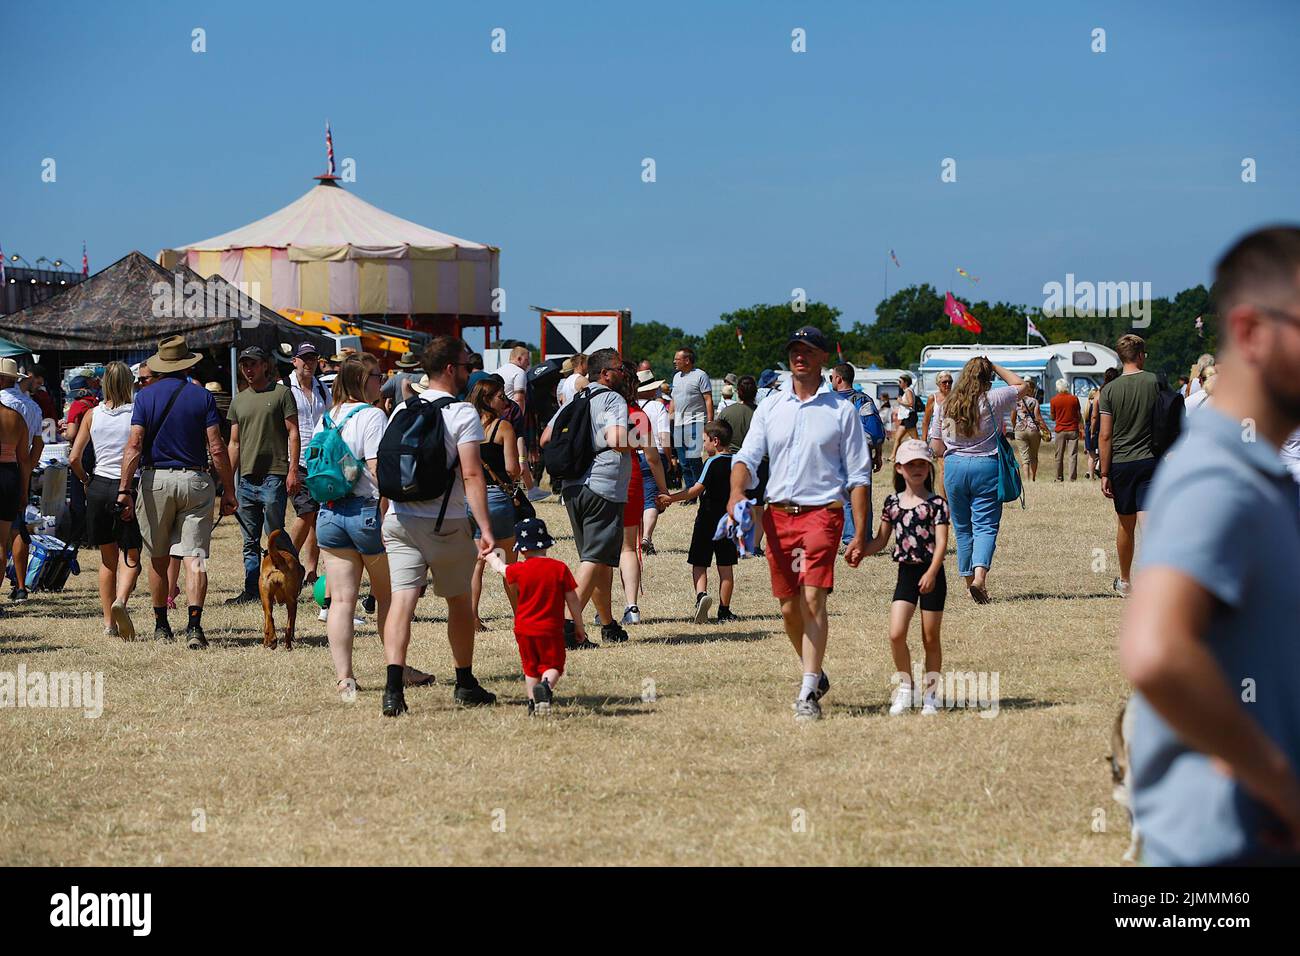 Woodchurch, Kent, UK. 07 August, 2022. On a hot and sunny day in the Kent countryside thousands of people arrive at one of the largest steam rally events in the south east. Photo Credit: Paul Lawrenson/Alamy Live News Stock Photo